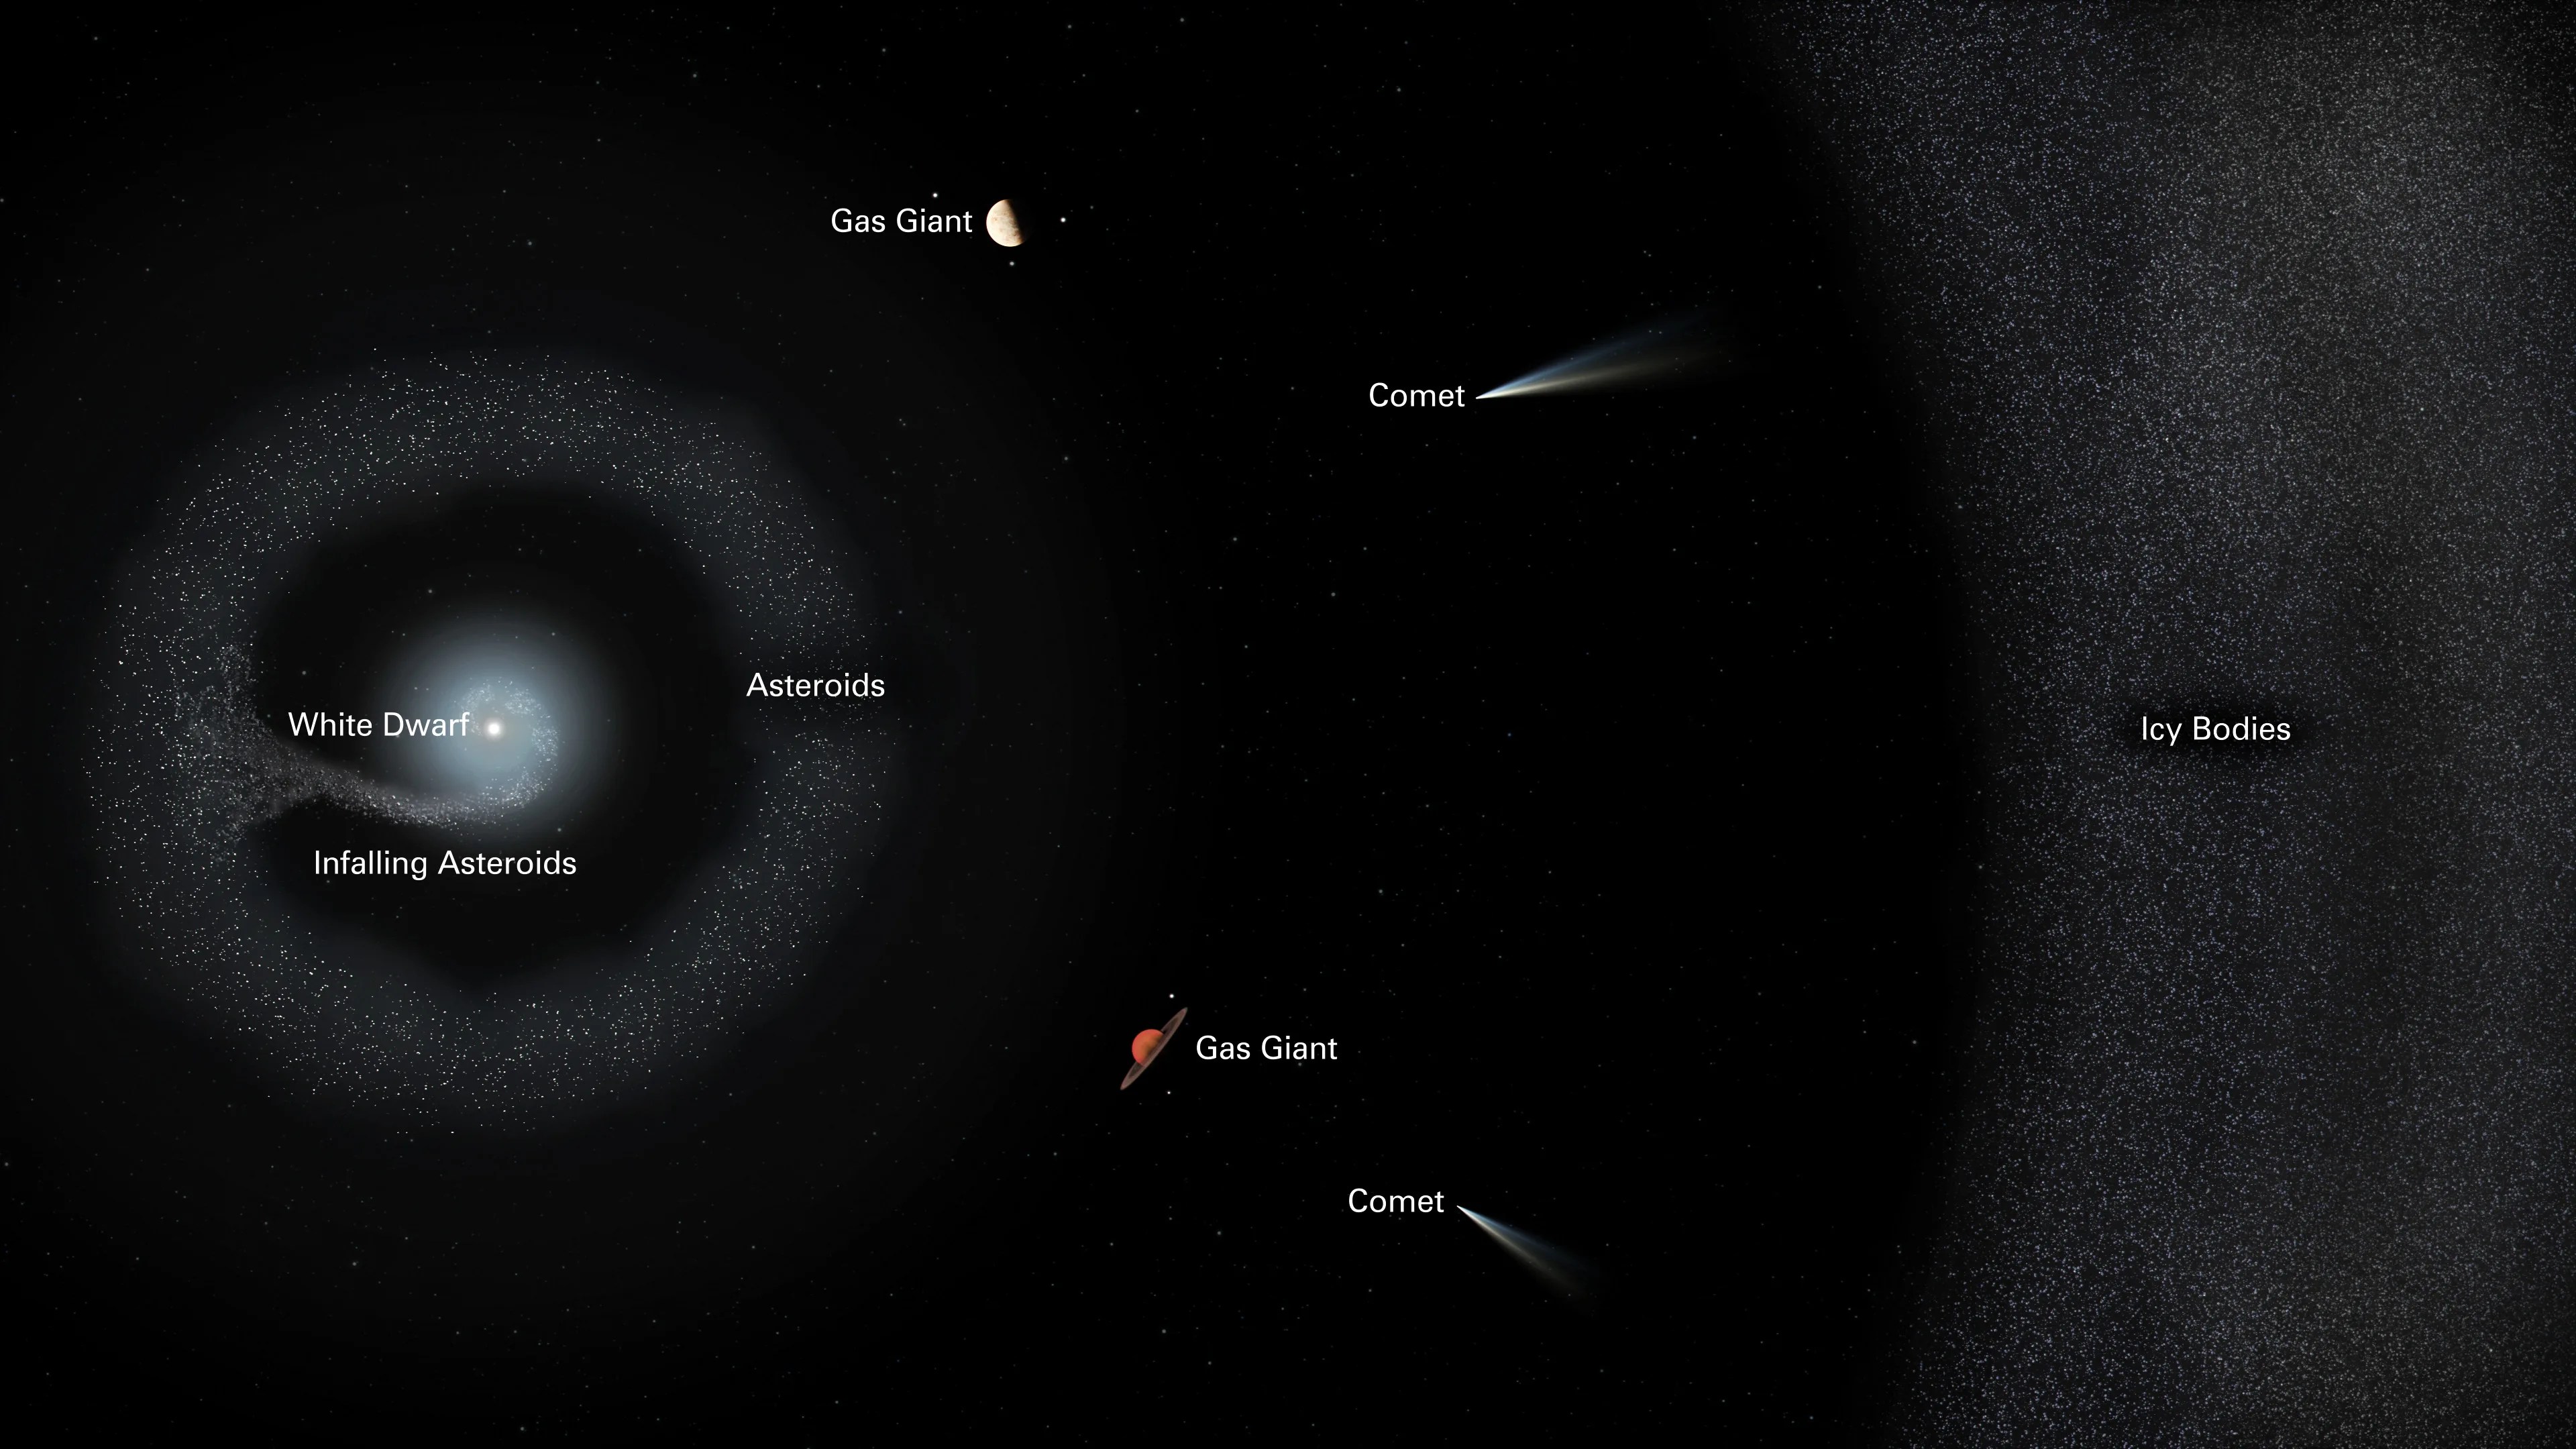 left center, bright-white star encircled by a ring of asteroids. center: comets and yellow and red gas planets. far right: small white dots represent a segment of the icy cloud that may encircle the system.